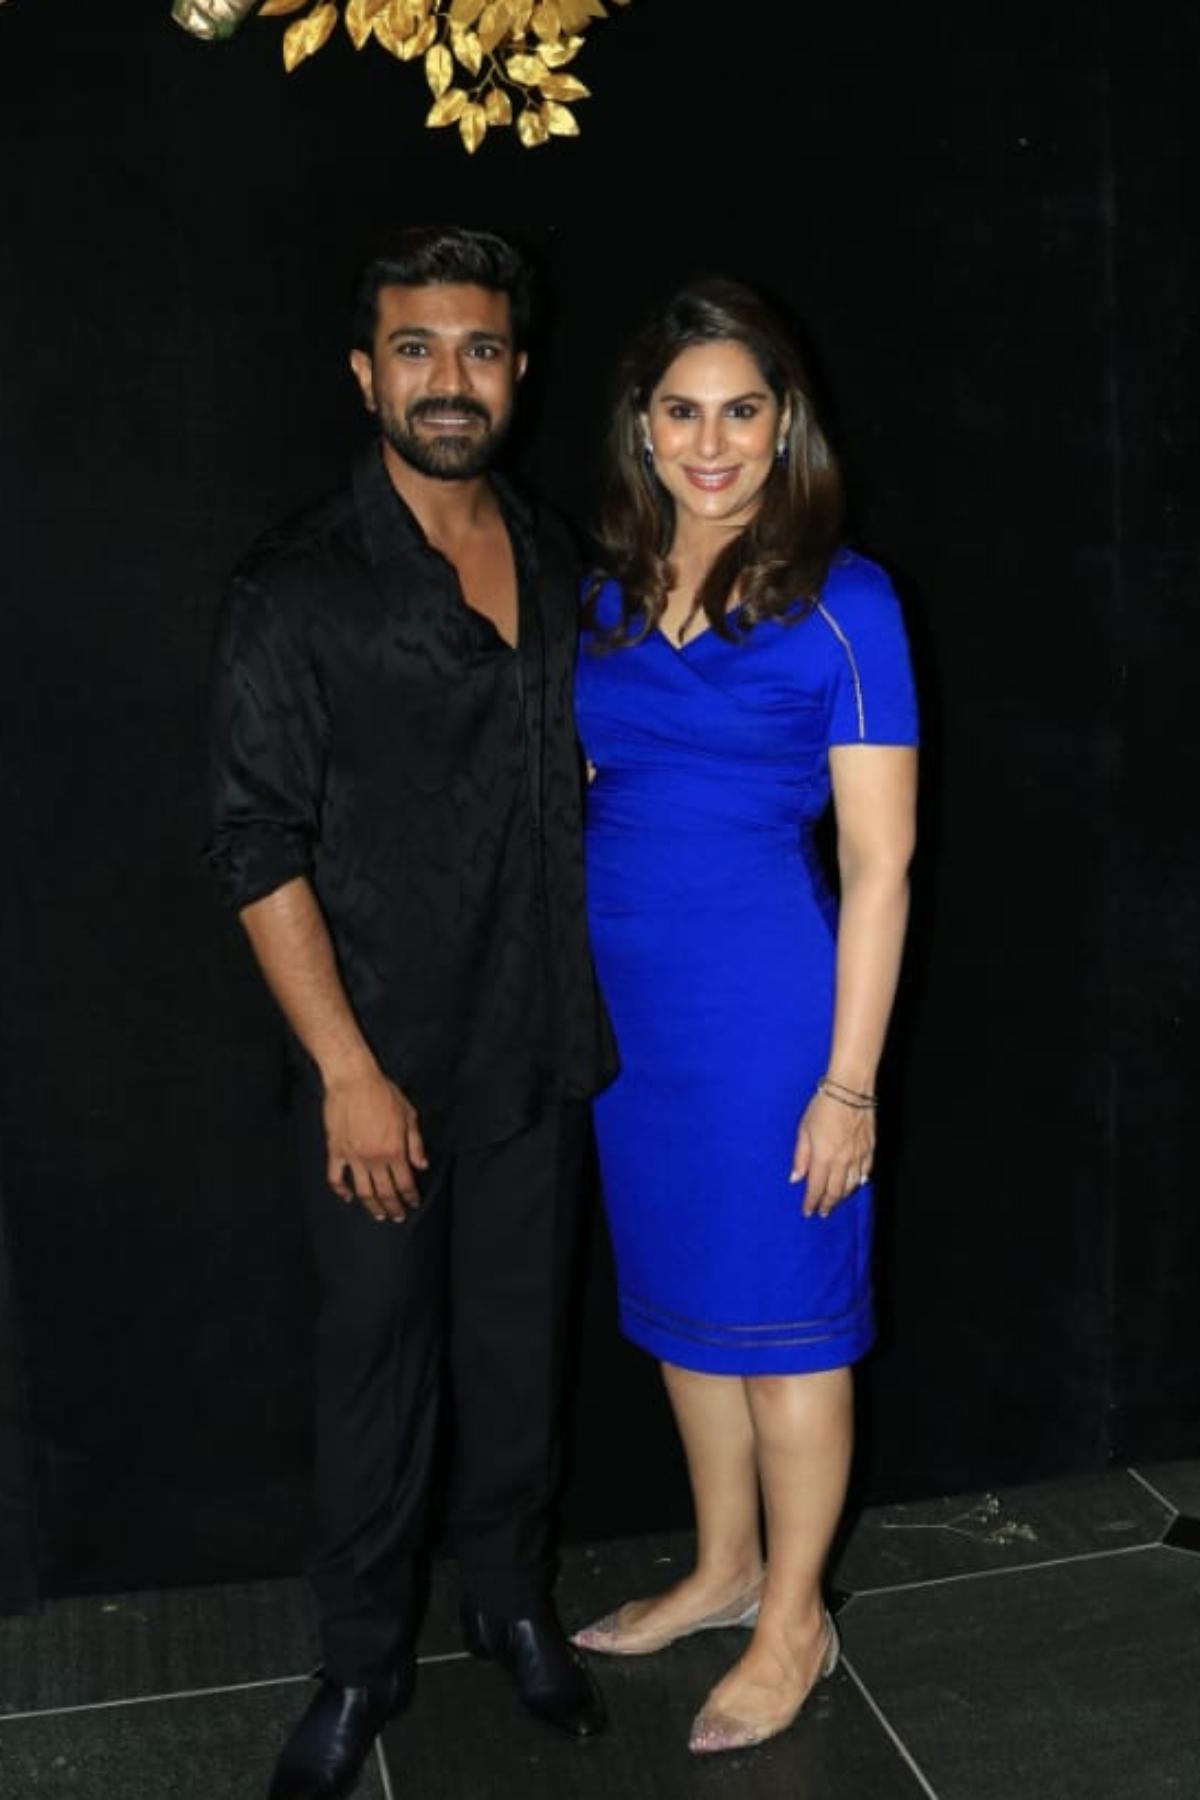 Birthday boy, Ram Charan was all smiles as he posed with his wife Upasana Konidela. While Ram chose to go all-black on his special day, his wife, Upasana looked beautiful as she flaunted her baby bump in a stunning blue dress. 